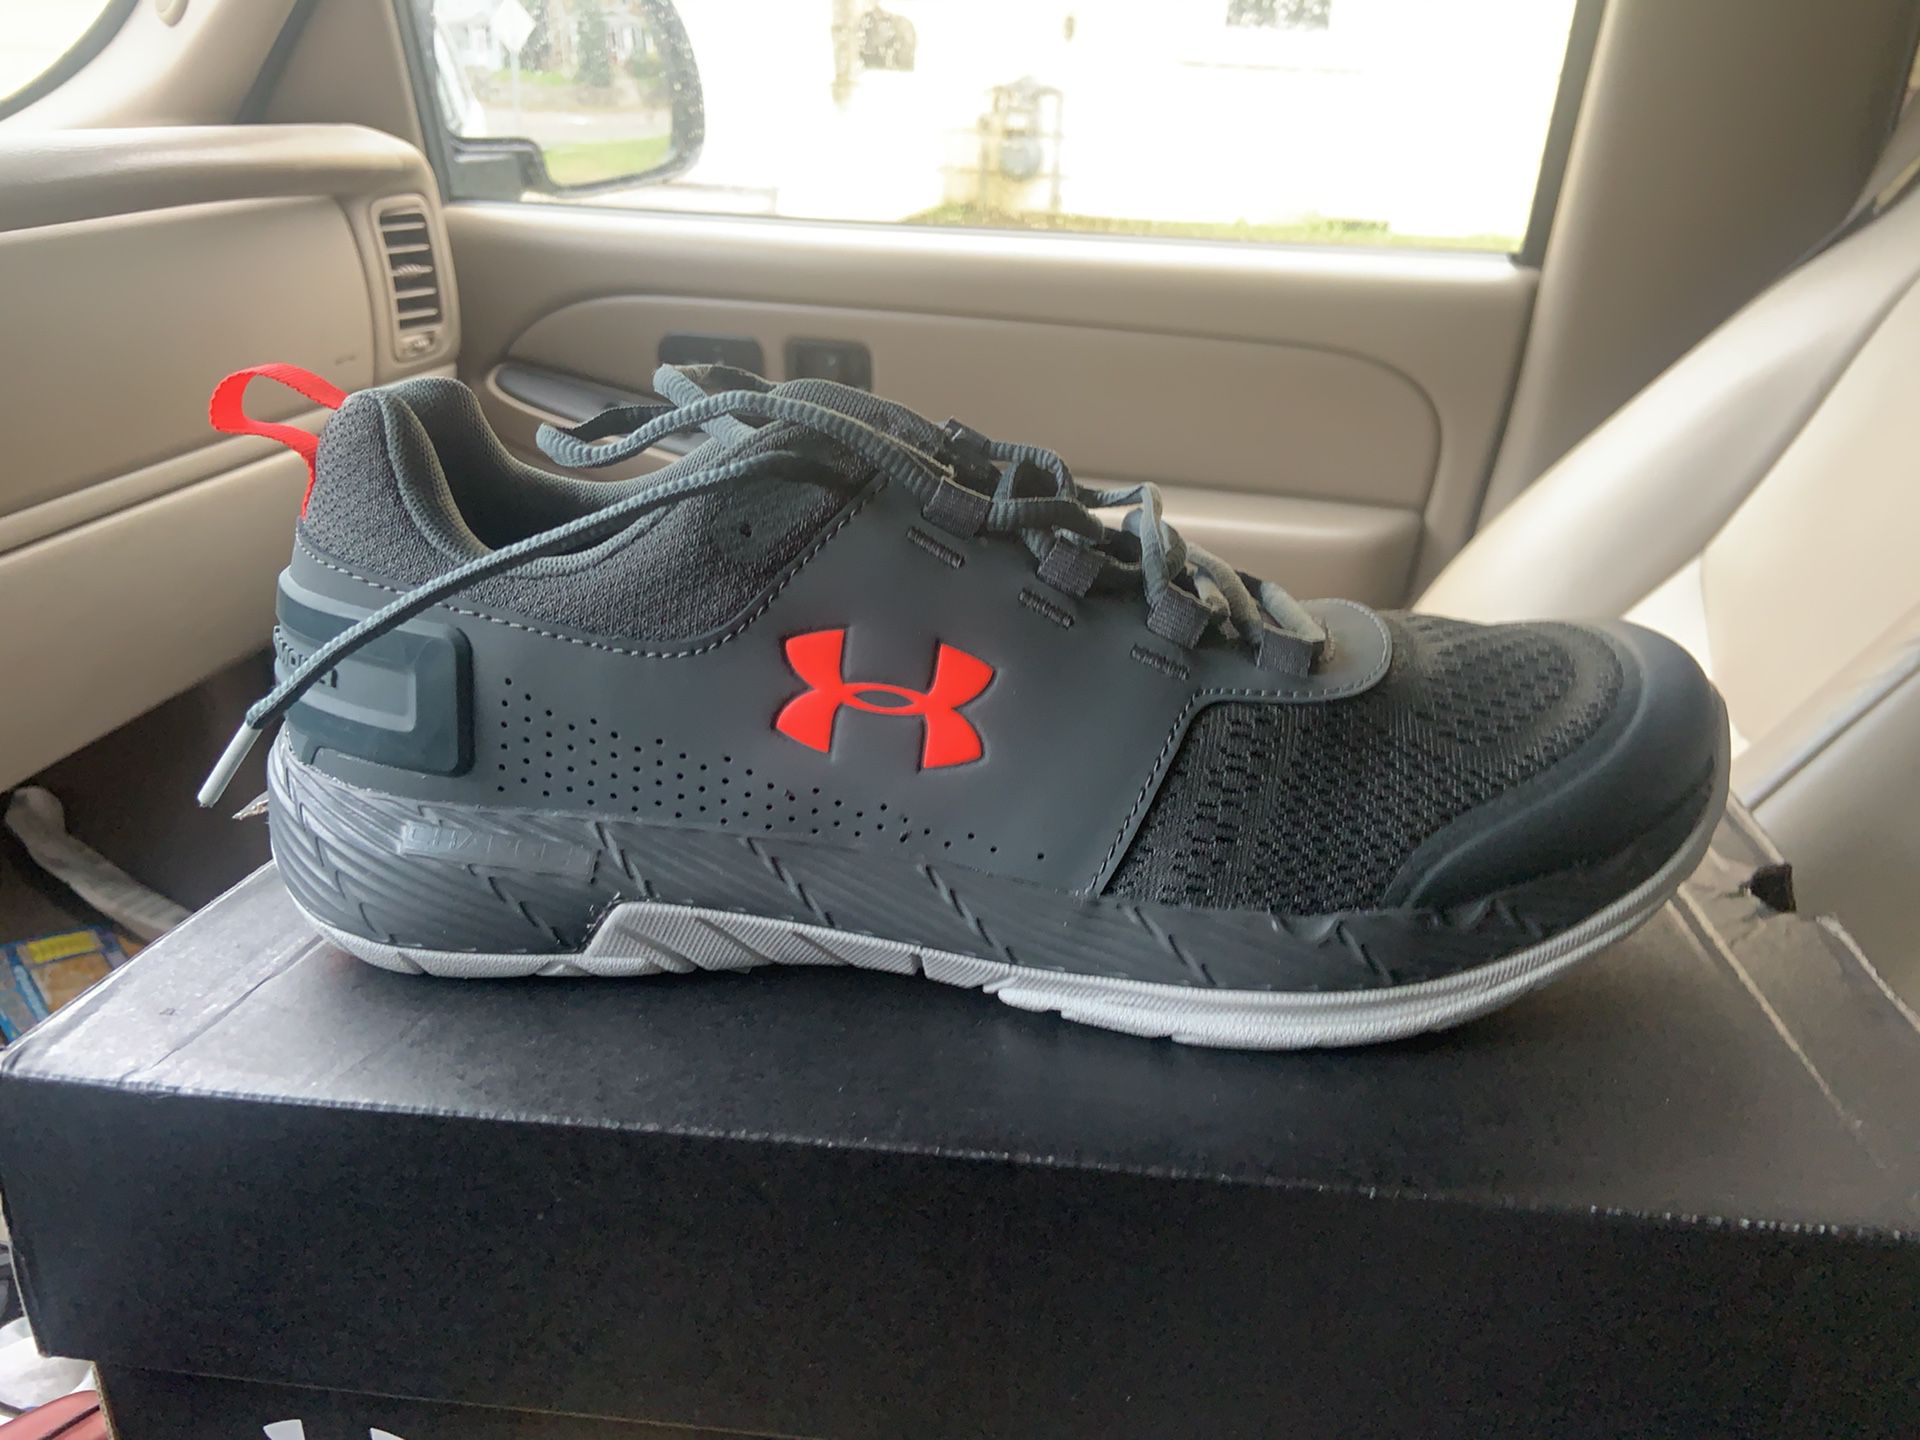 Under Armour & Nike shoes